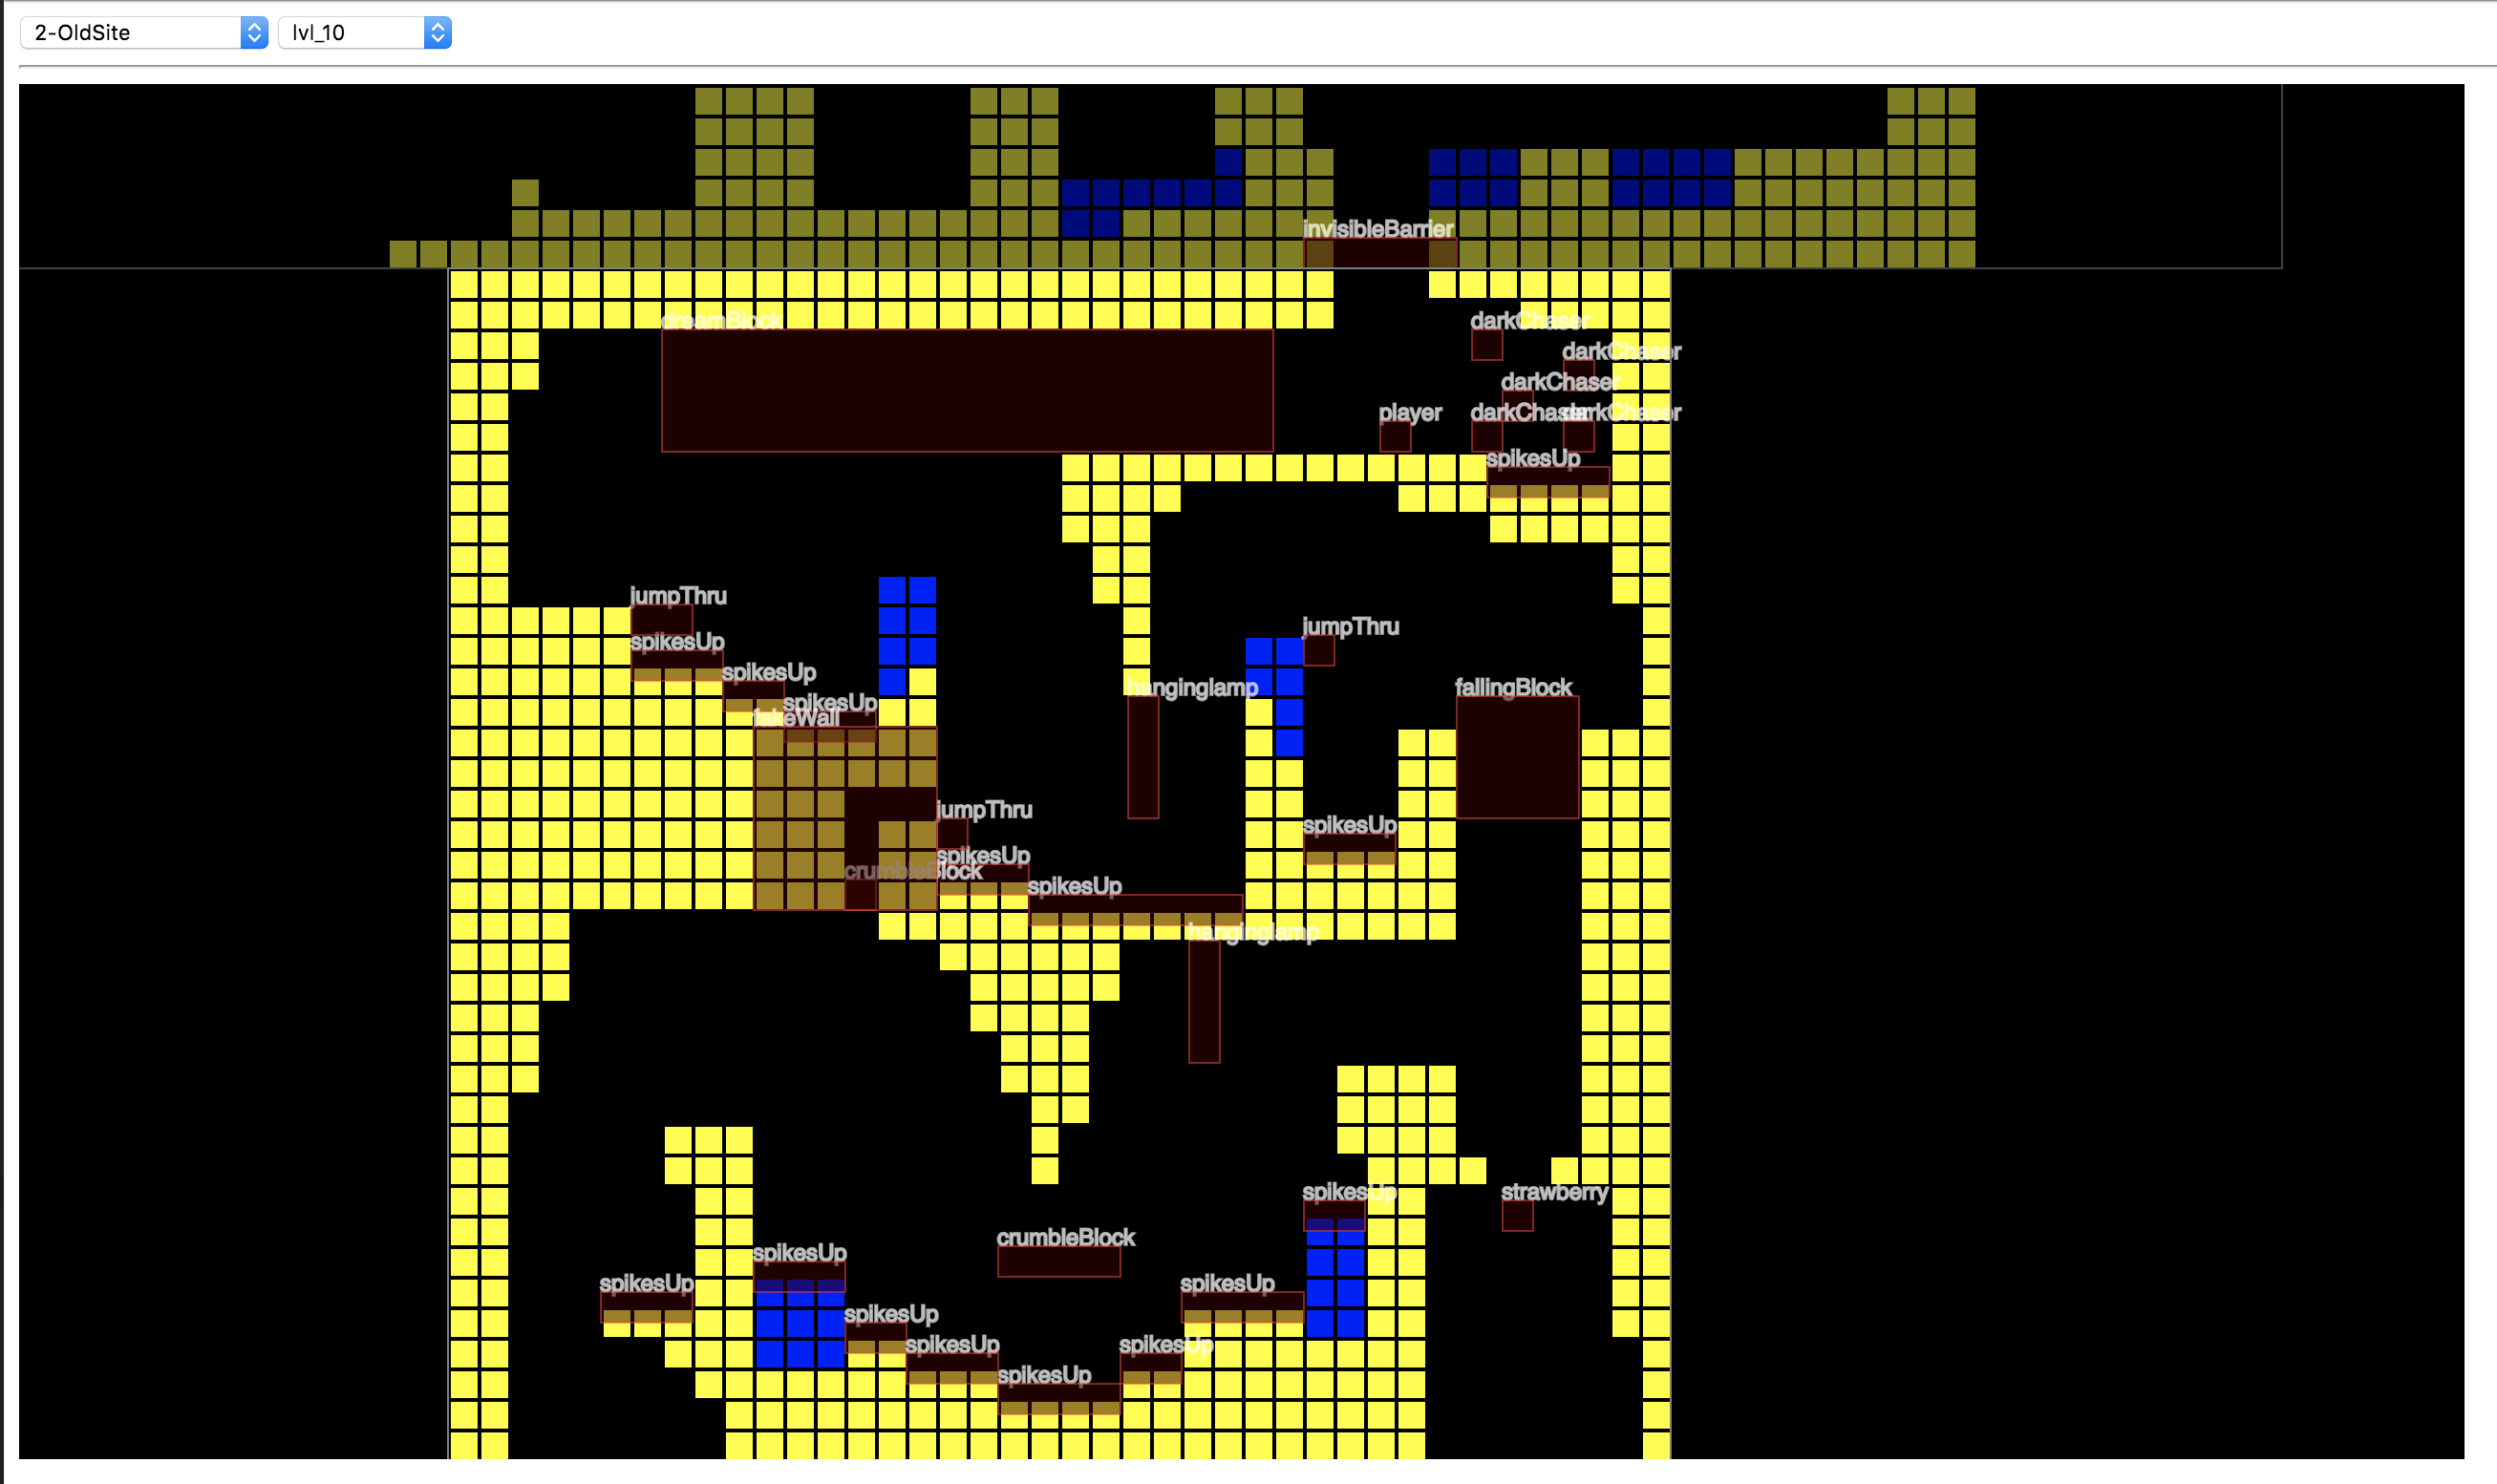 Screenshot of Level view for one of the Badeline chase levels in Old Site